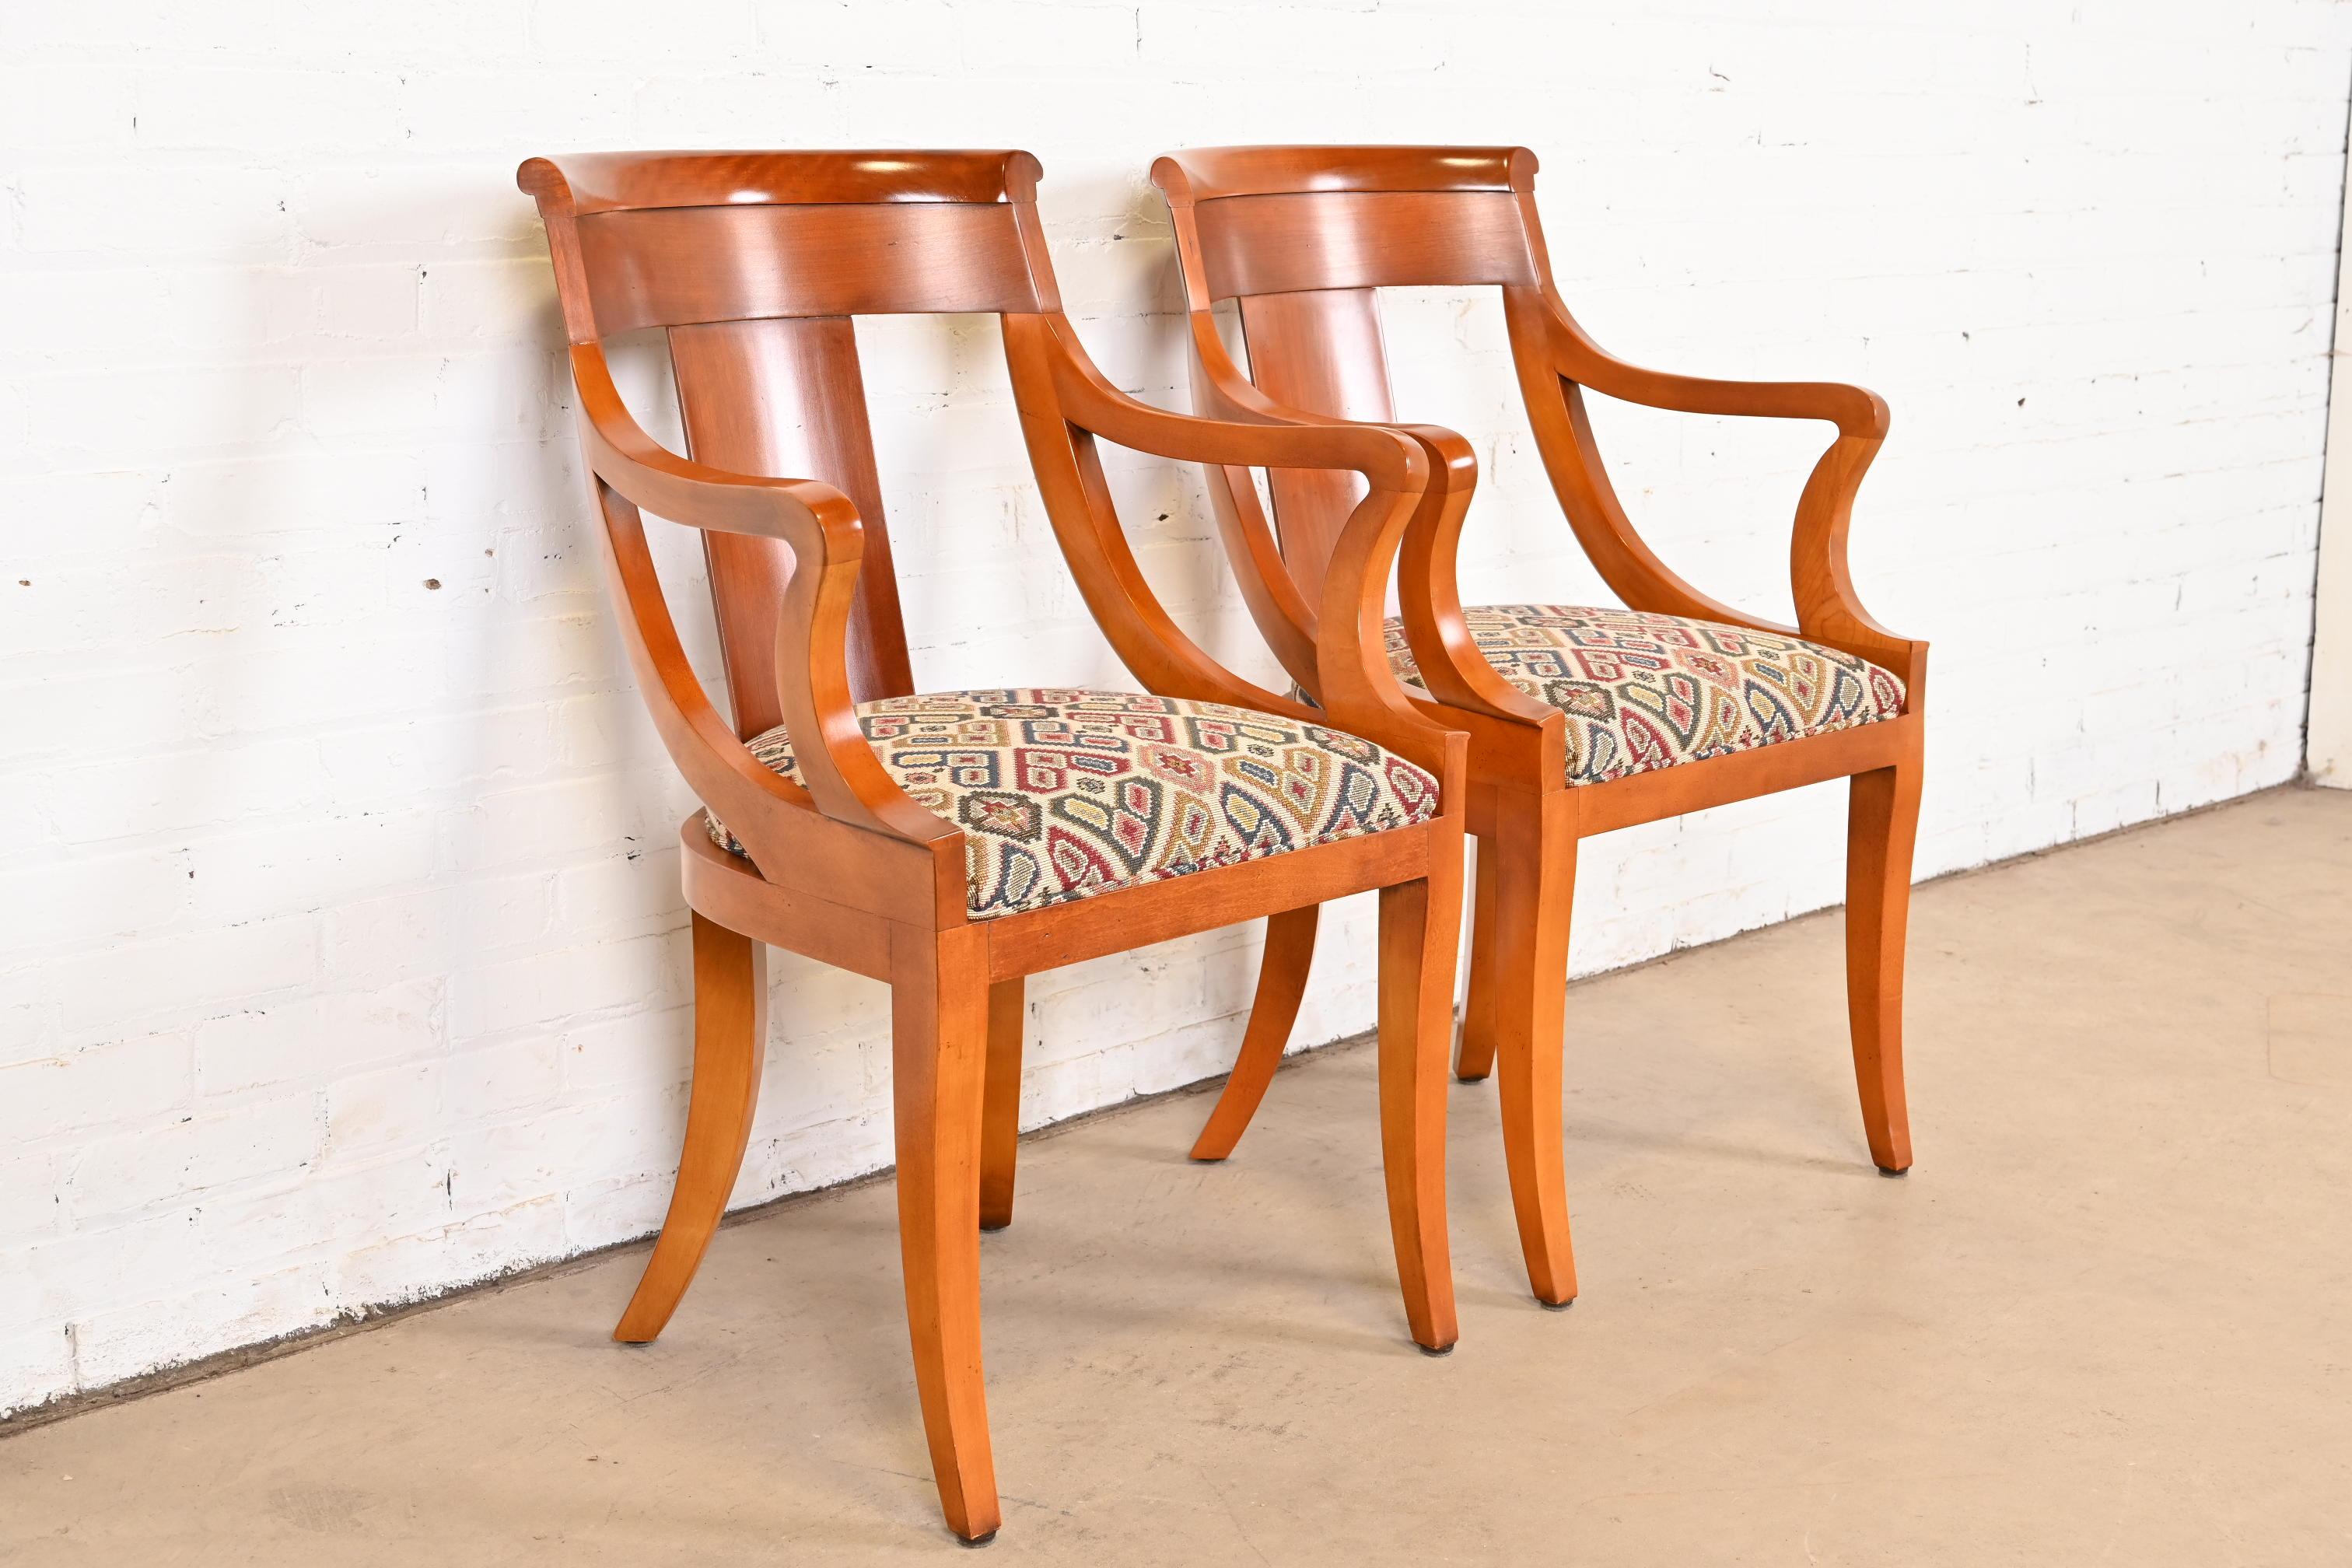 20th Century Baker Furniture Regency Solid Cherry Wood Arm Chairs, Pair For Sale